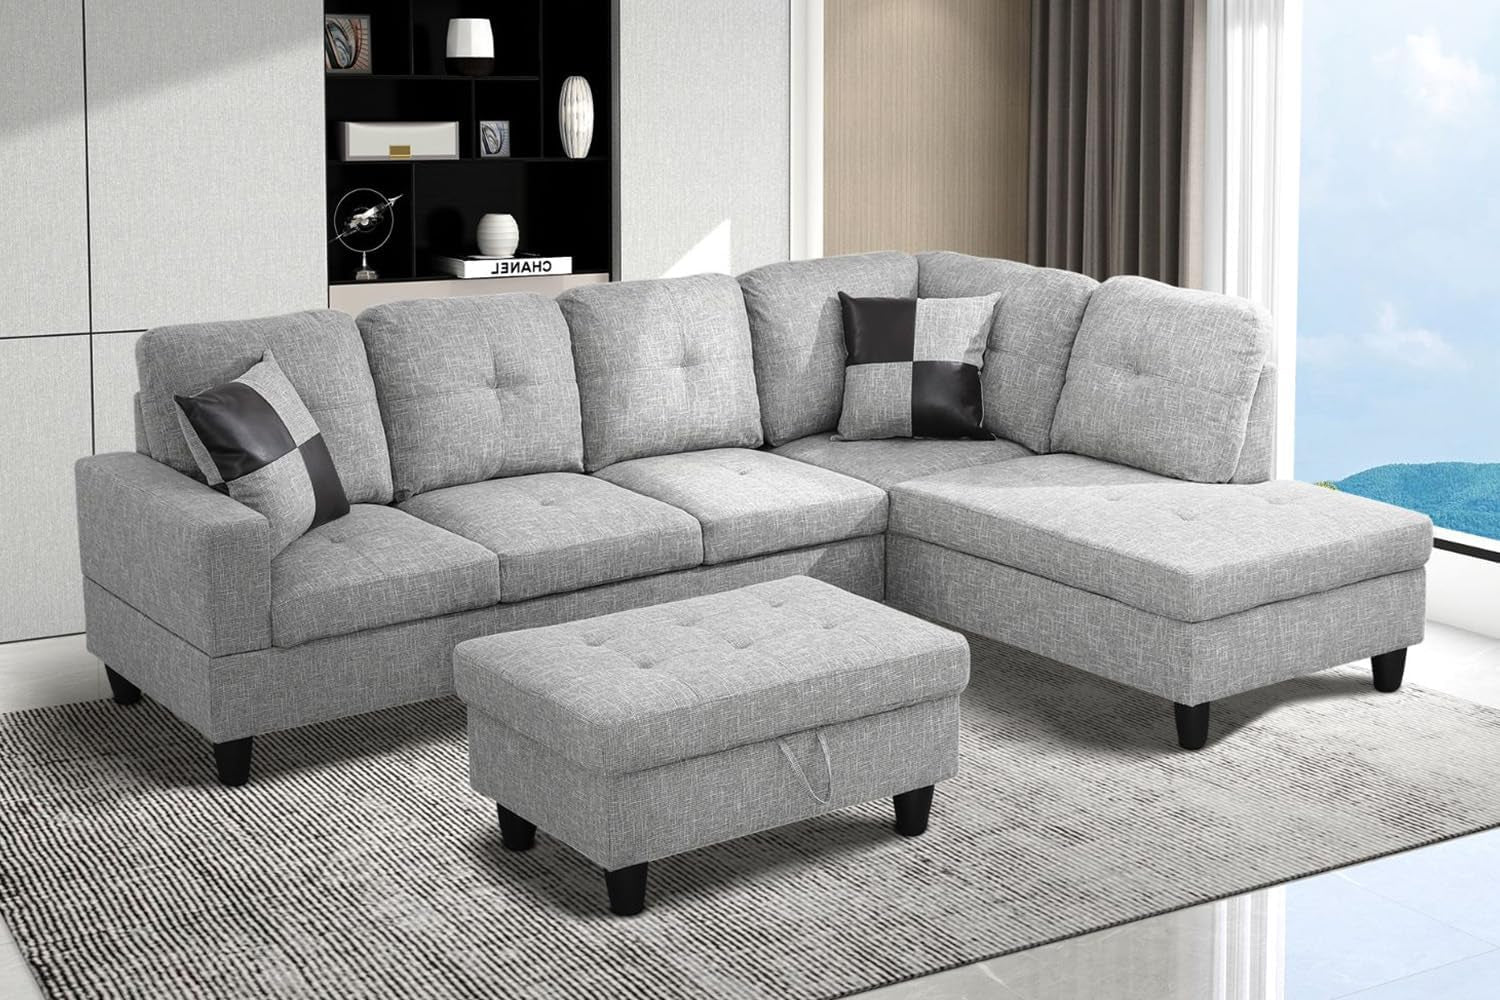 Grey Linen Sectional Couch for Living Room Set, 105 Inch Sectional Sofa L Shaped Couch with Storage Ottoman/Gray Linen Fabric/Facing Left Chaise